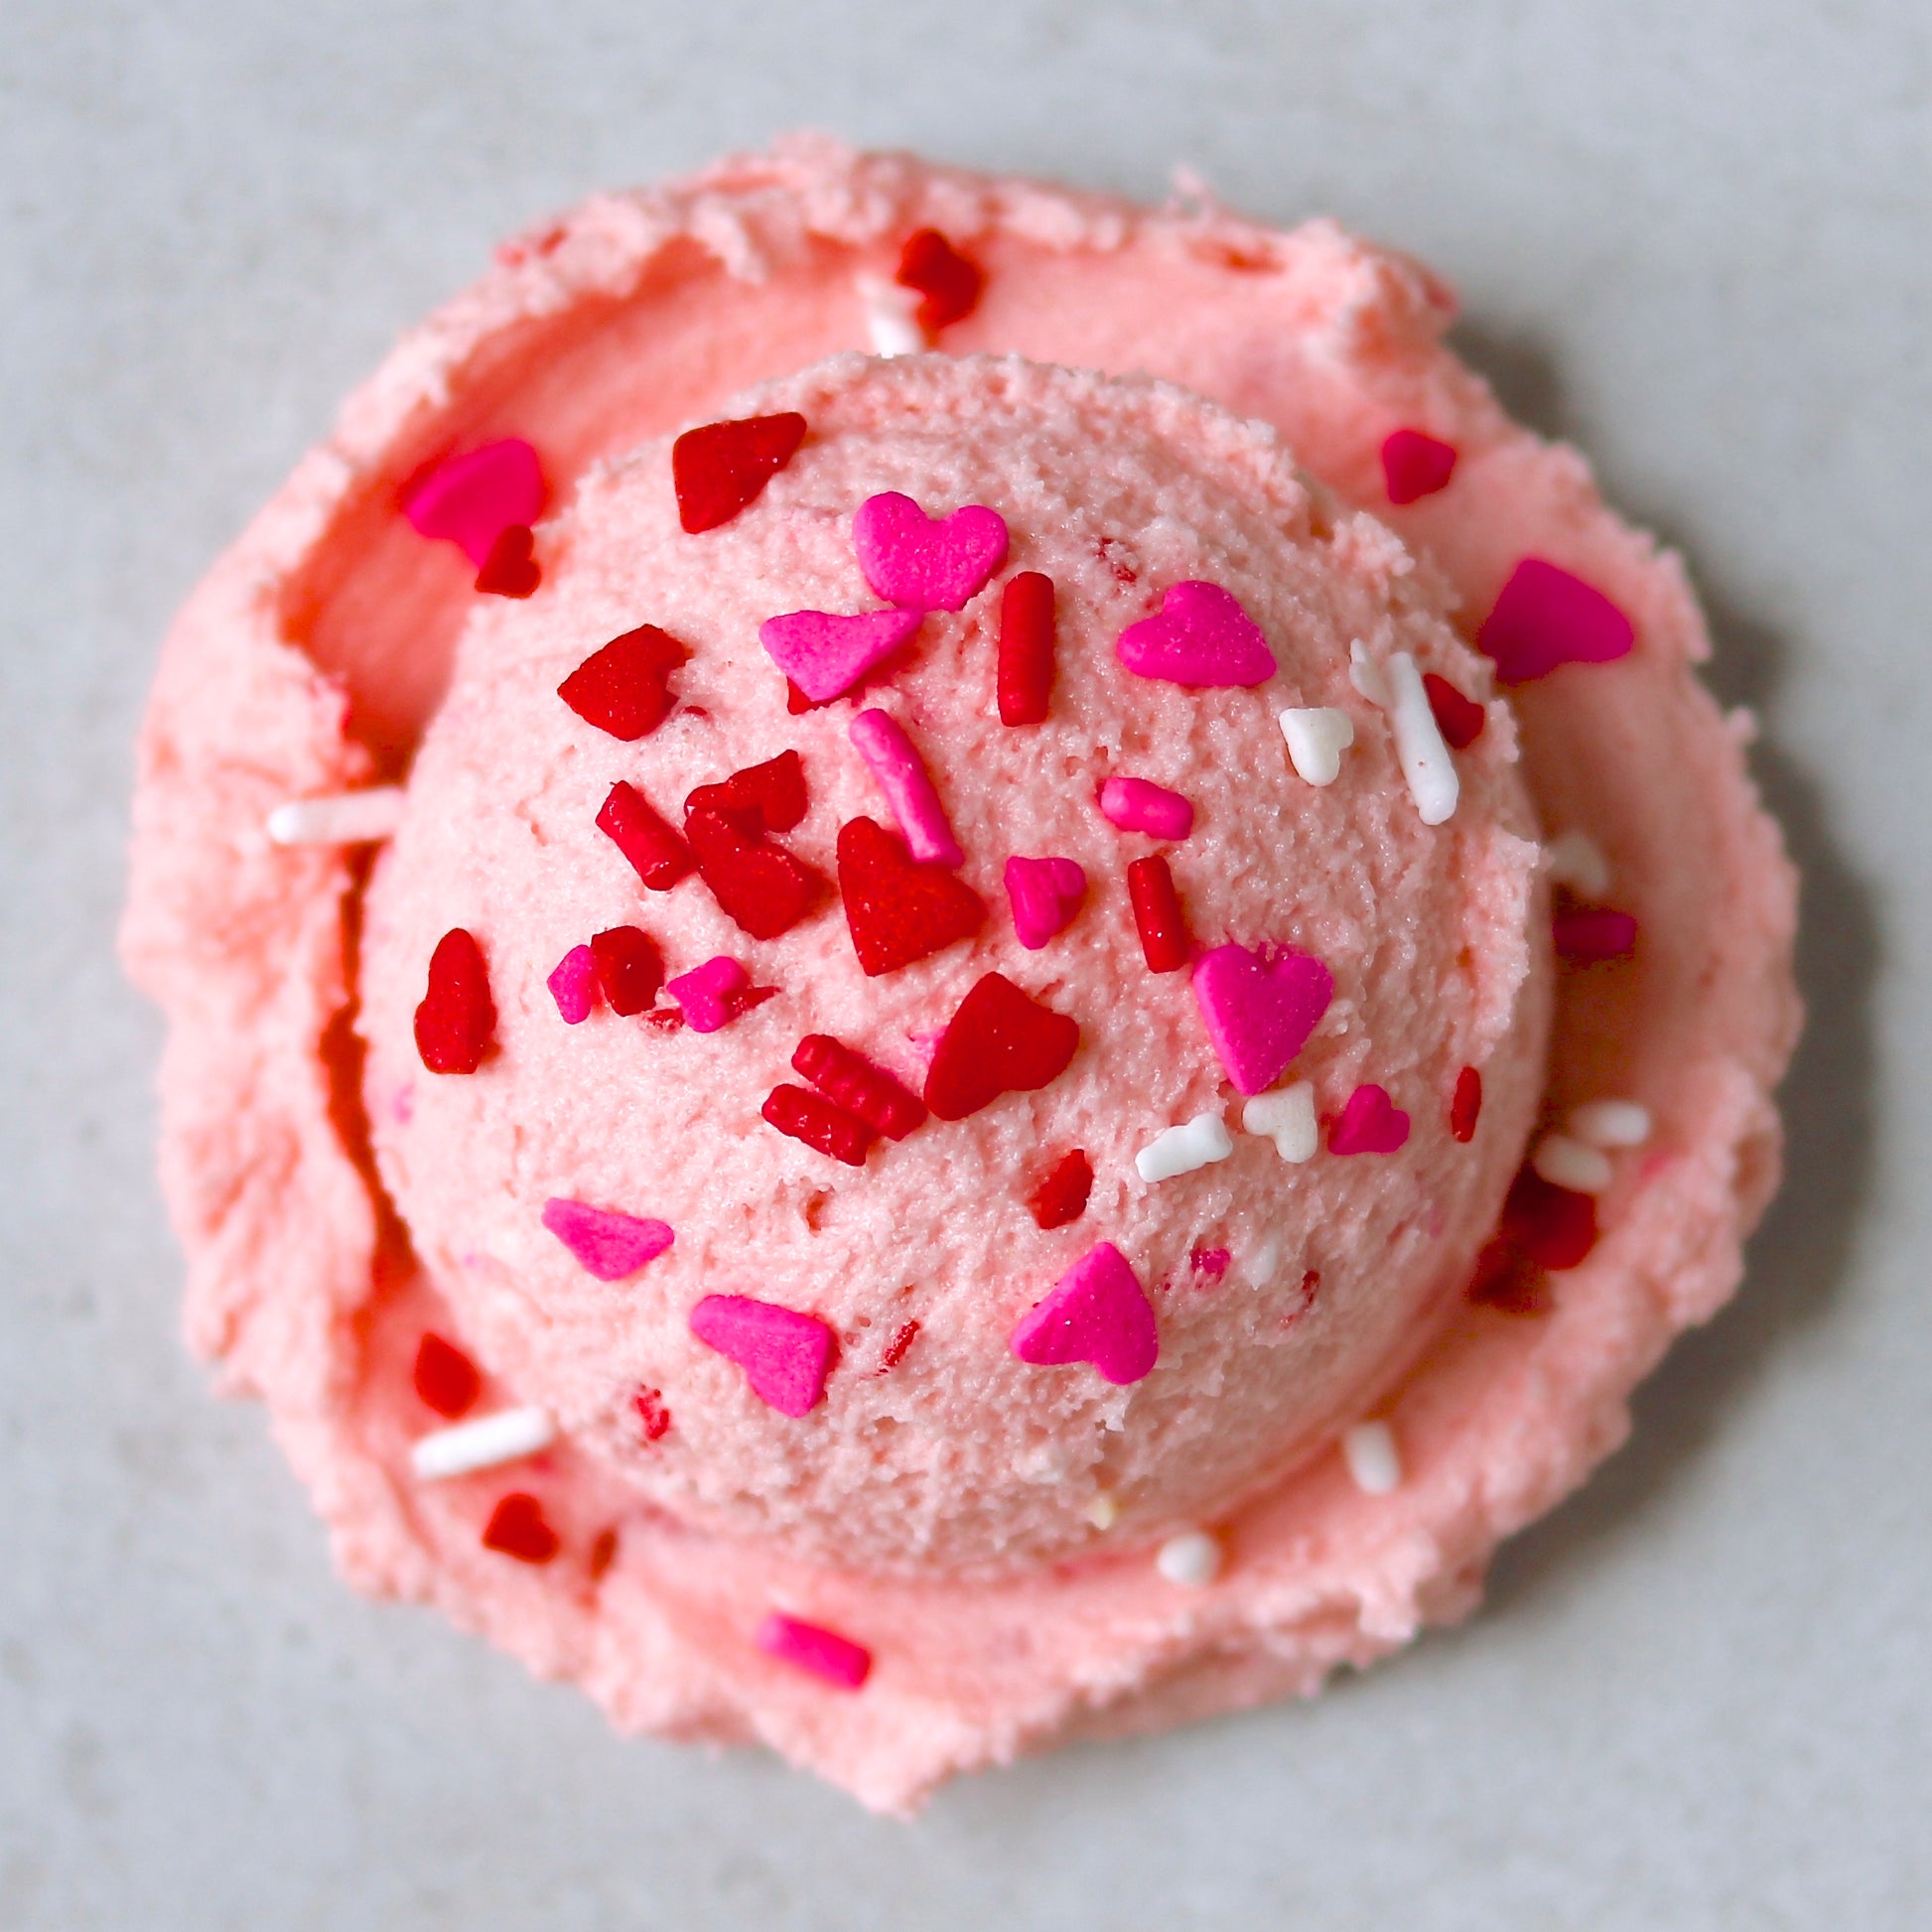 Pink Cookie Recipe - Banned Recipe in Elyria, OH - Speakeasy at